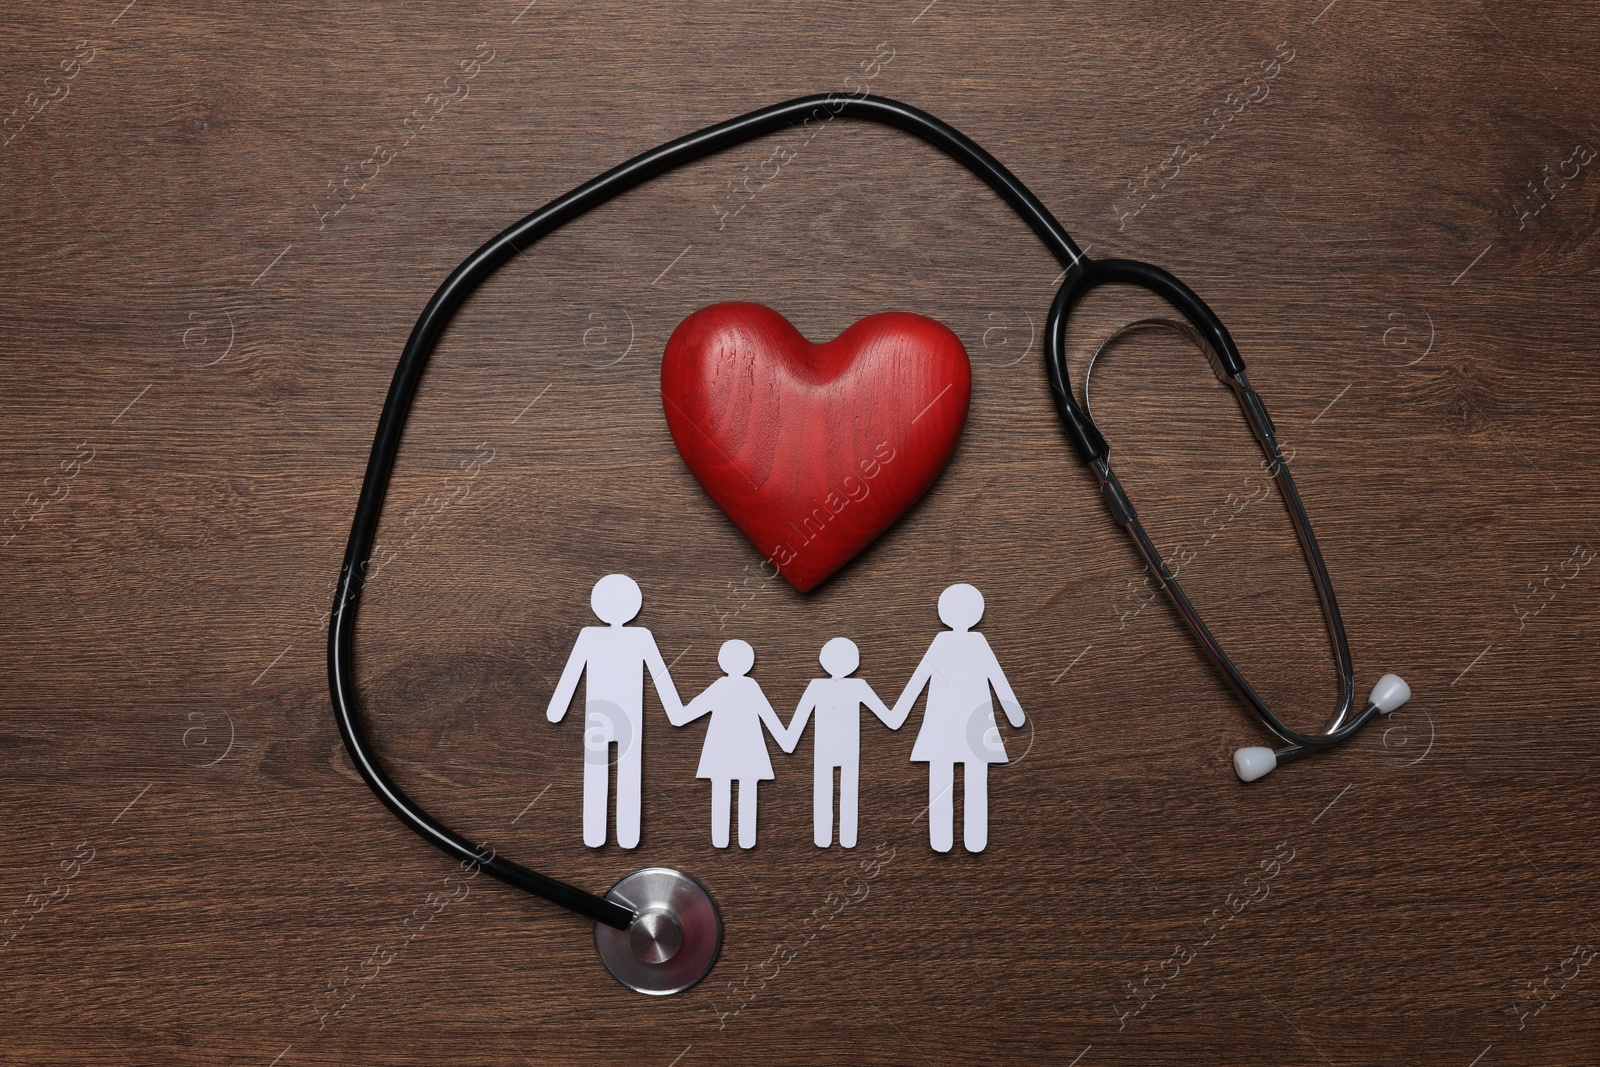 Photo of Paper family cutout, red heart and stethoscope on wooden background, flat lay. Insurance concept